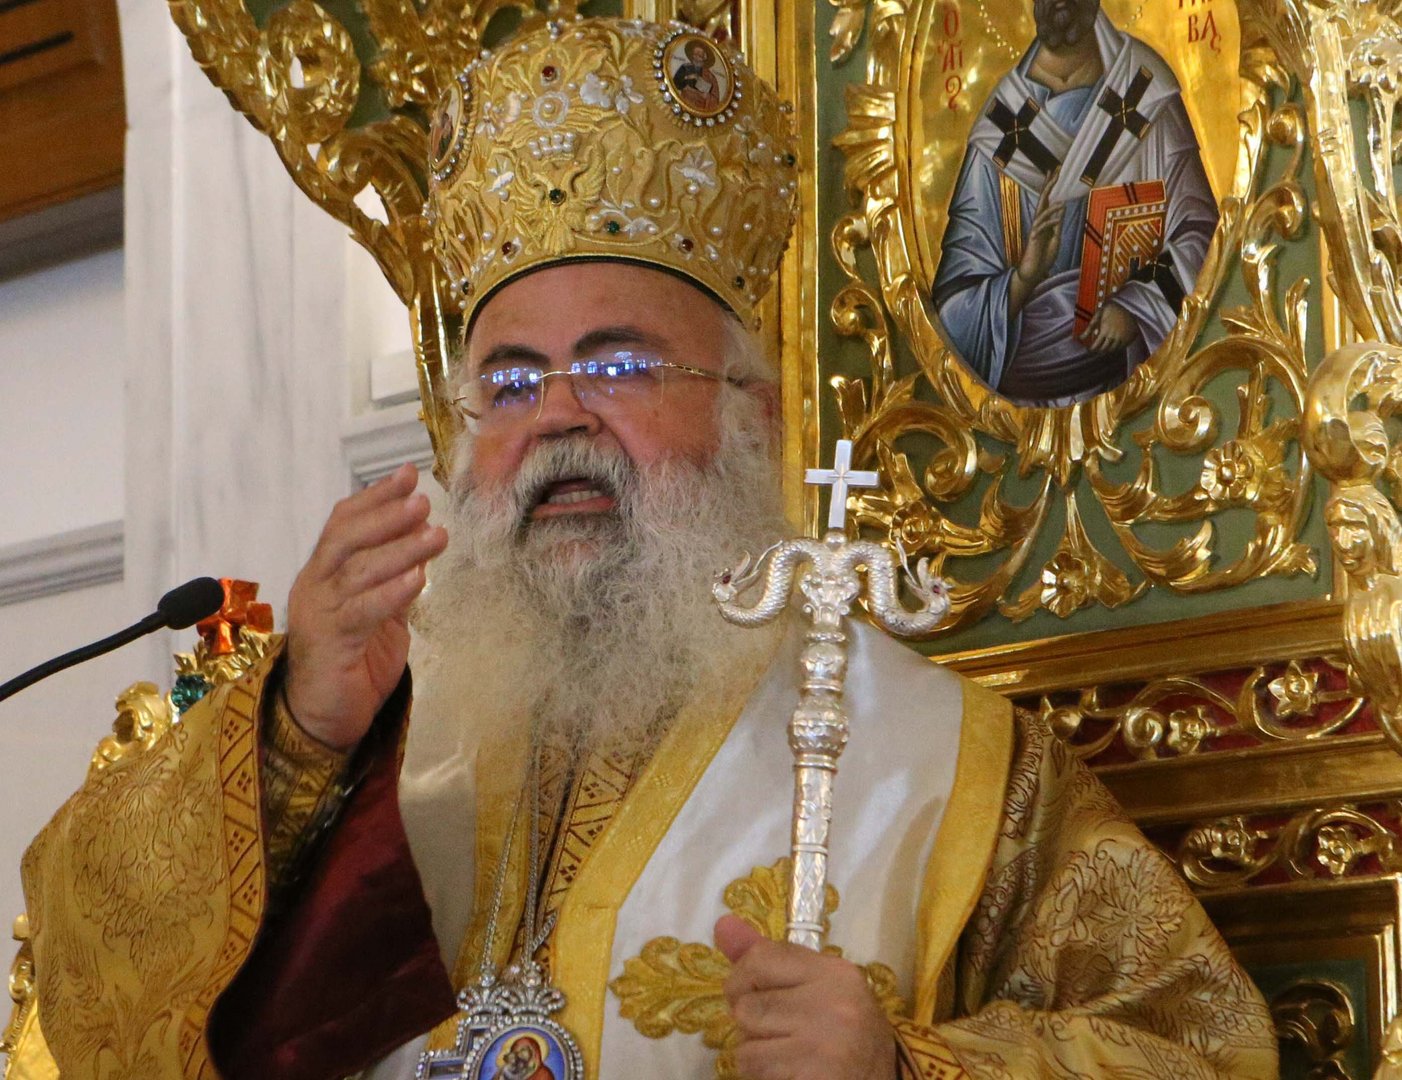 image Our View: New archbishop should avoid incendiary Cyprob comments